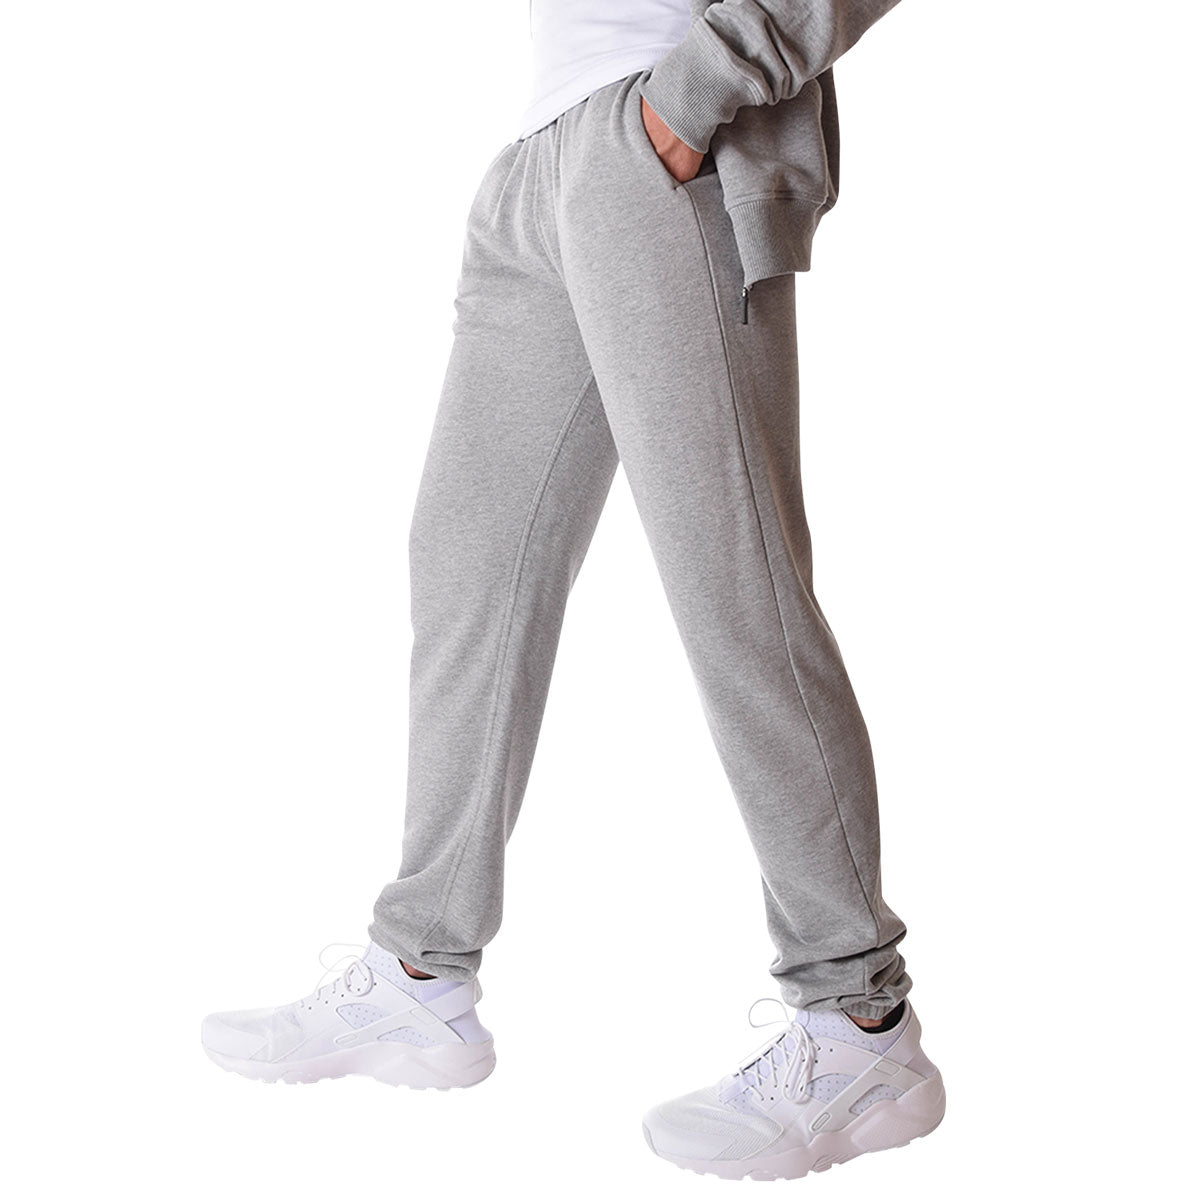 grey sweatpants with pockets